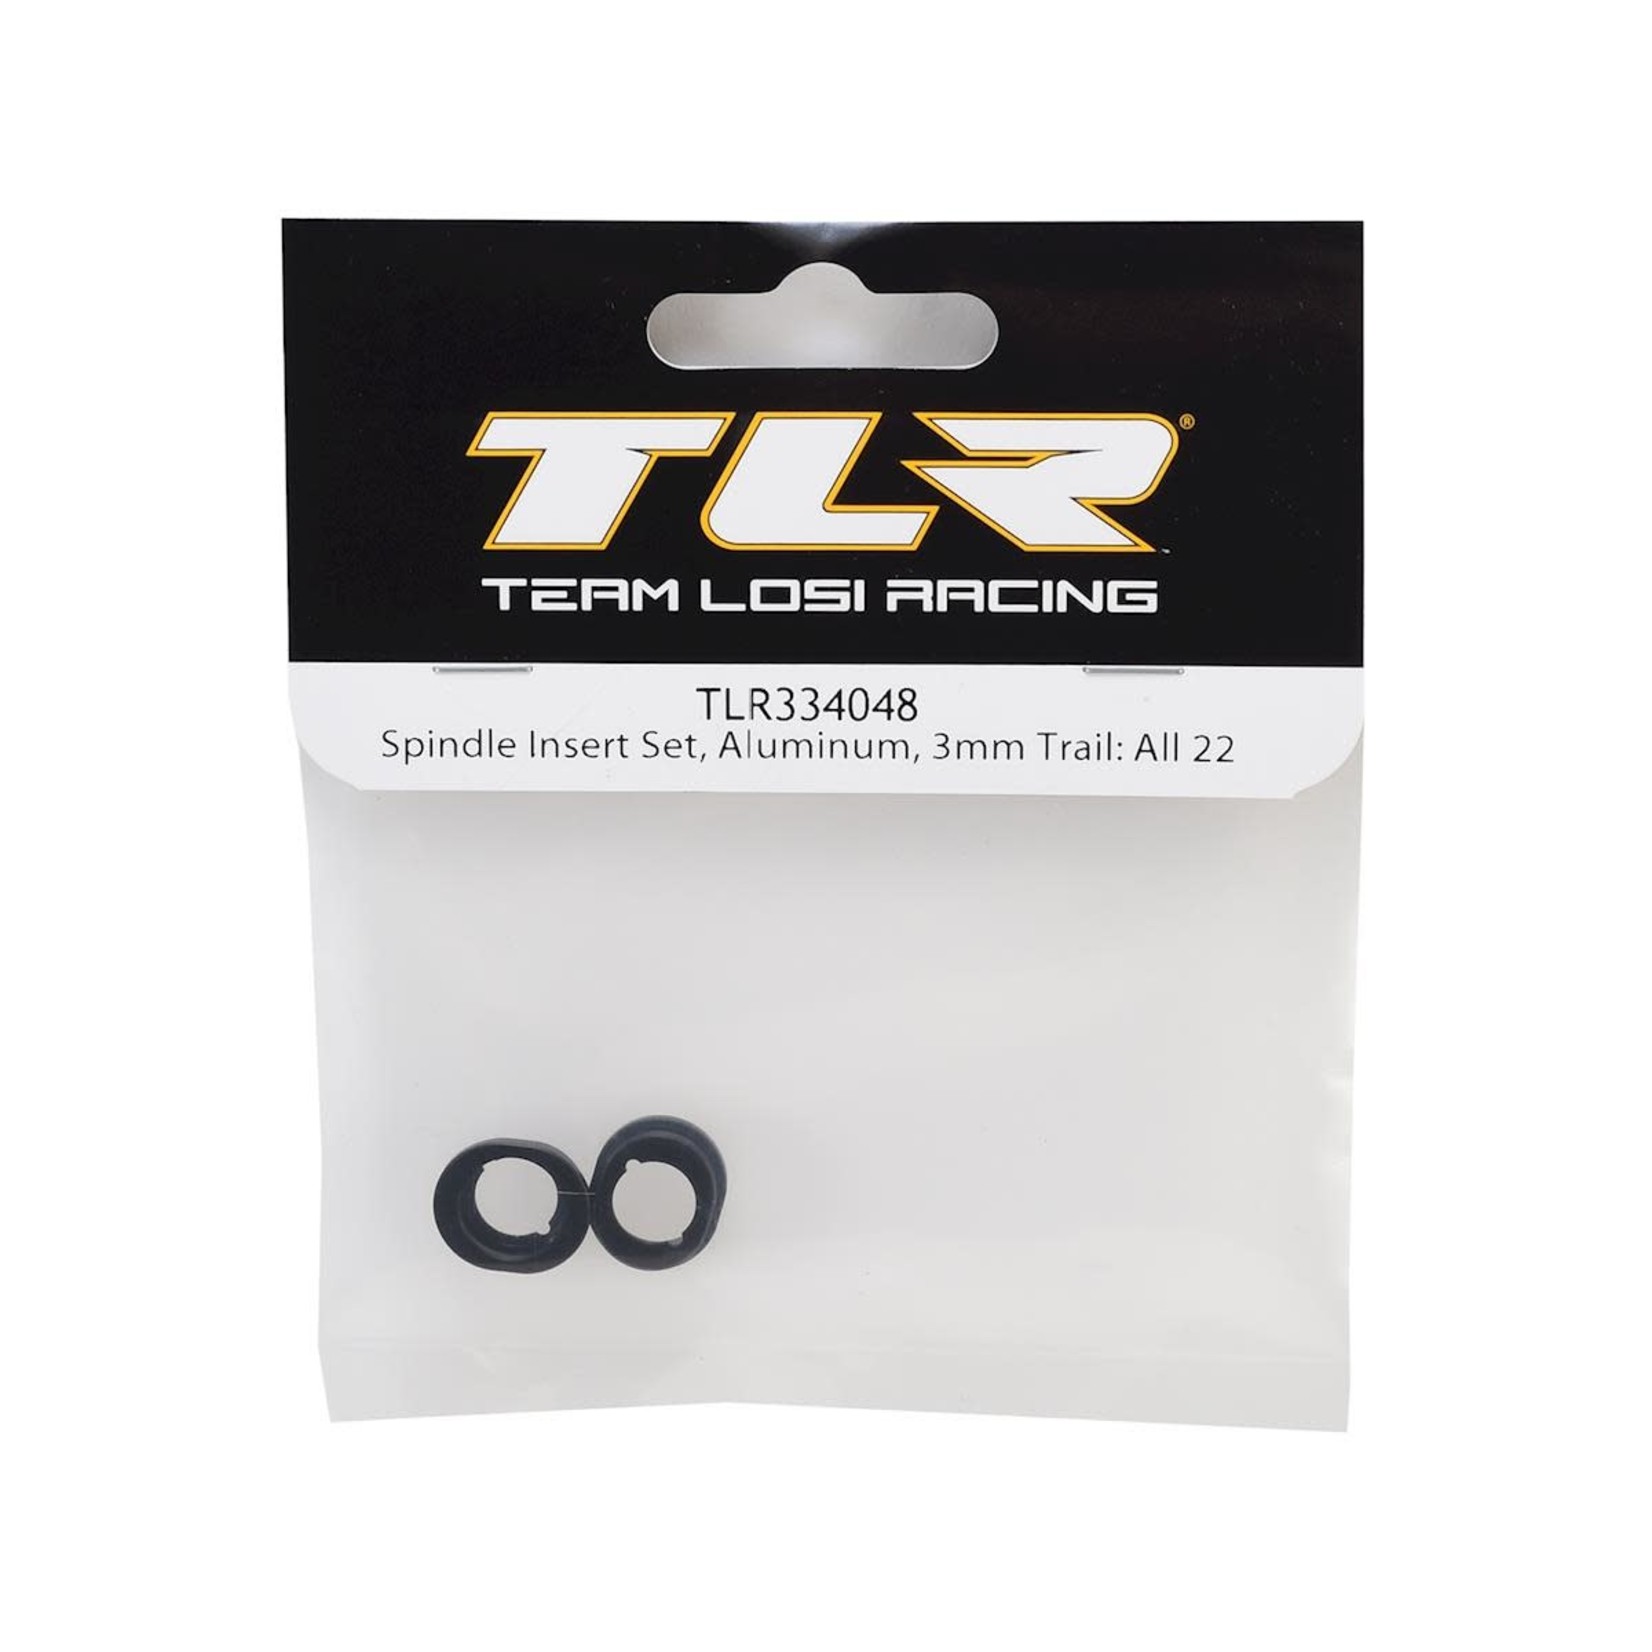 TLR Team Losi Racing 3mm Trail Aluminum Spindle Insert Set (All 22) #TLR334048